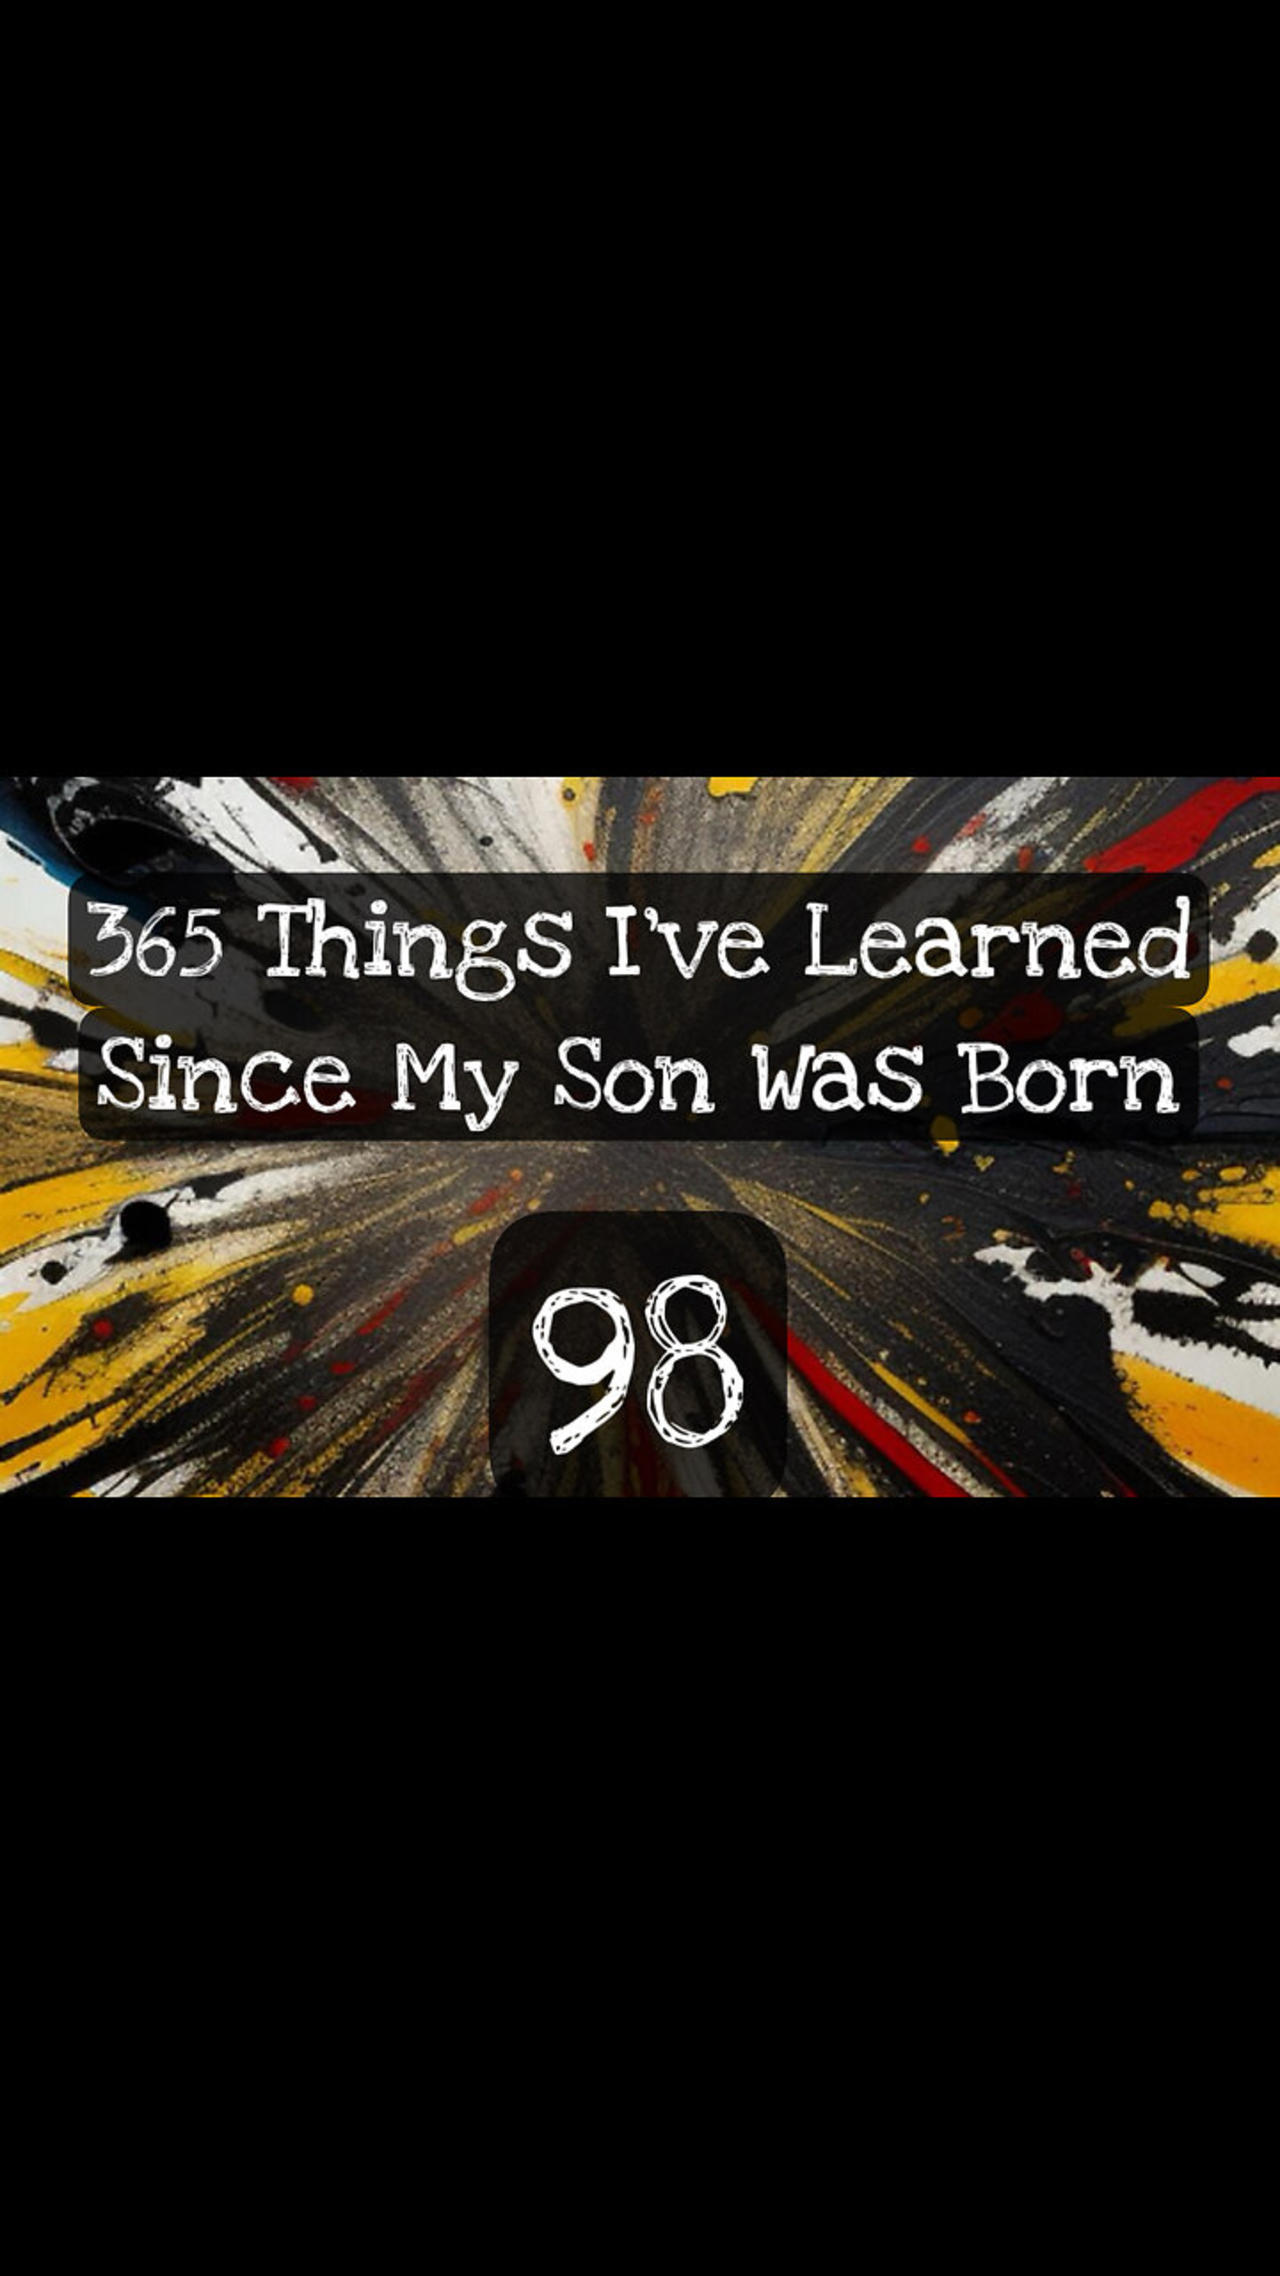 98/365 things I’ve learned since my son was born